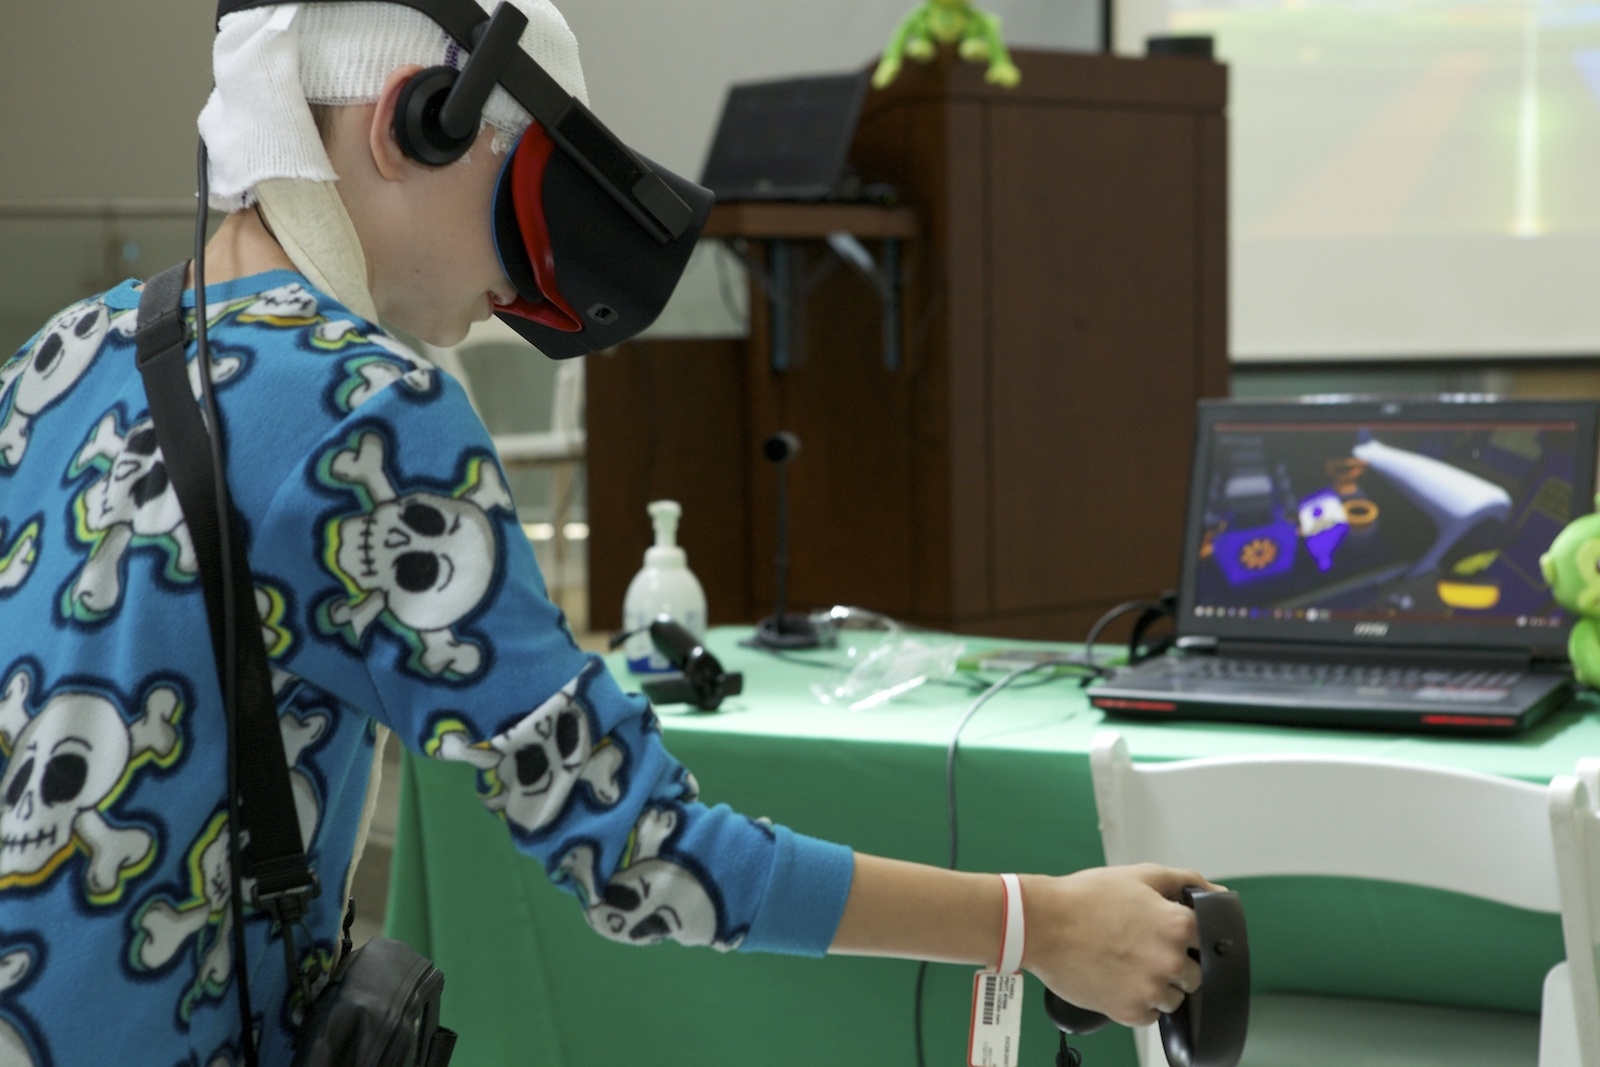 GameChanger brings virtual worlds to the kids who need it most | DeviceDaily.com